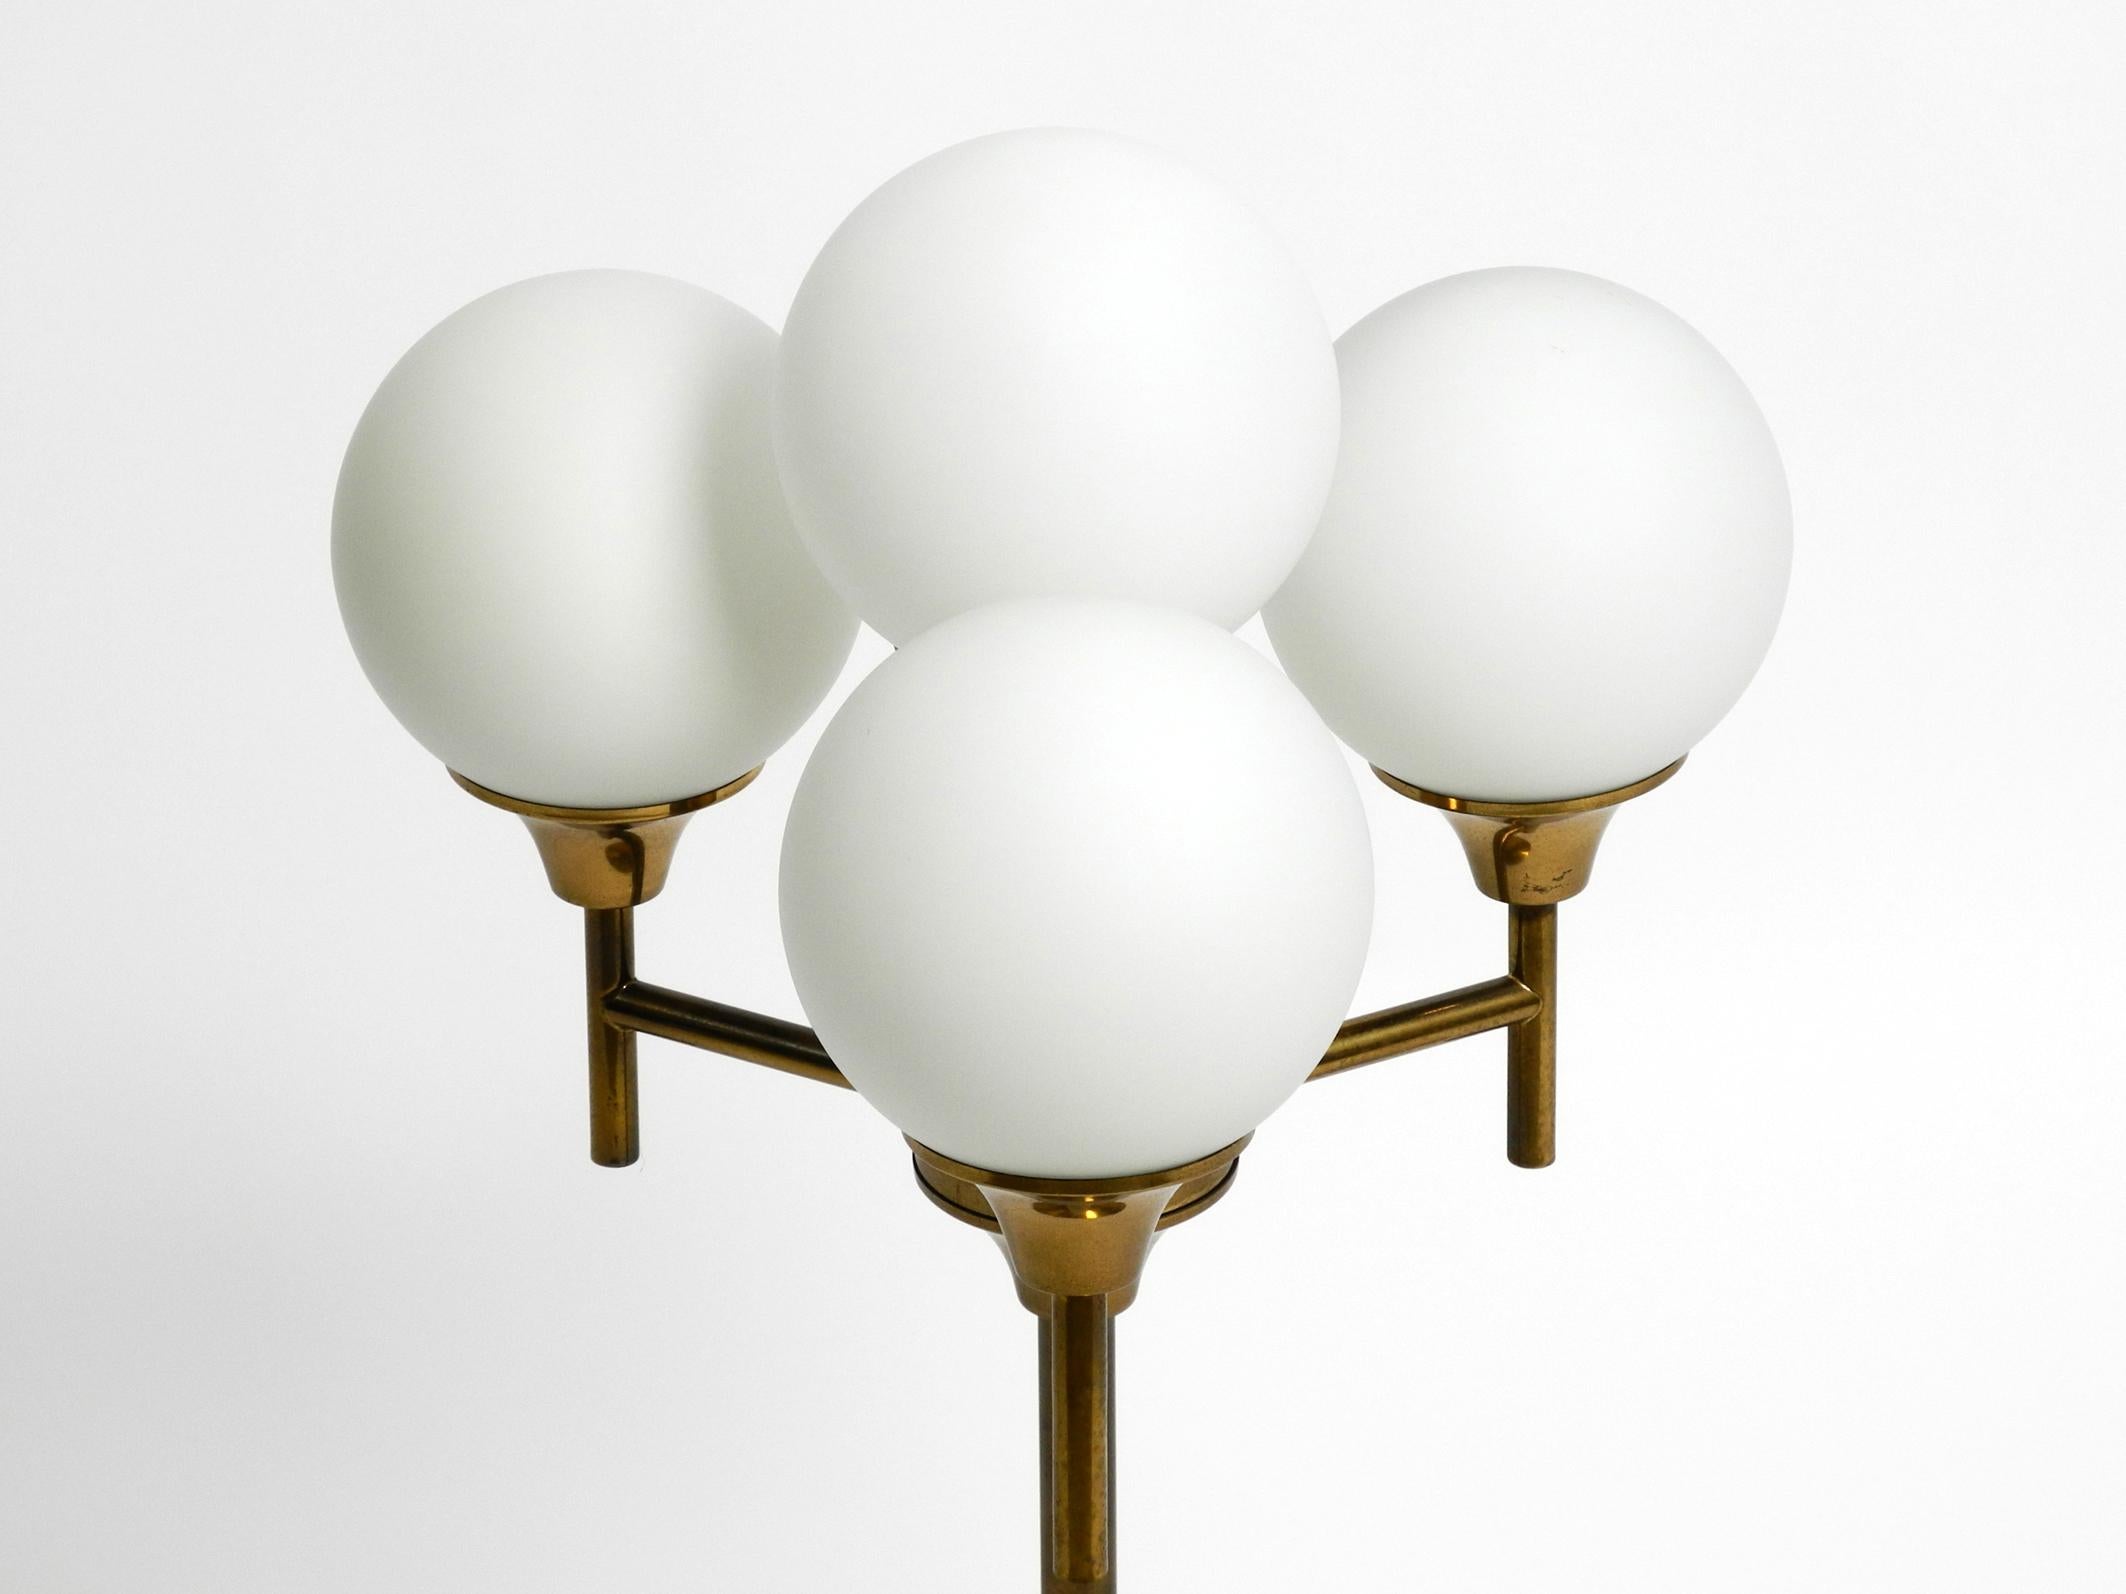 Large 1960s brass table or floor lamp with 4 glass spheres by Kaiser Leuchten For Sale 10